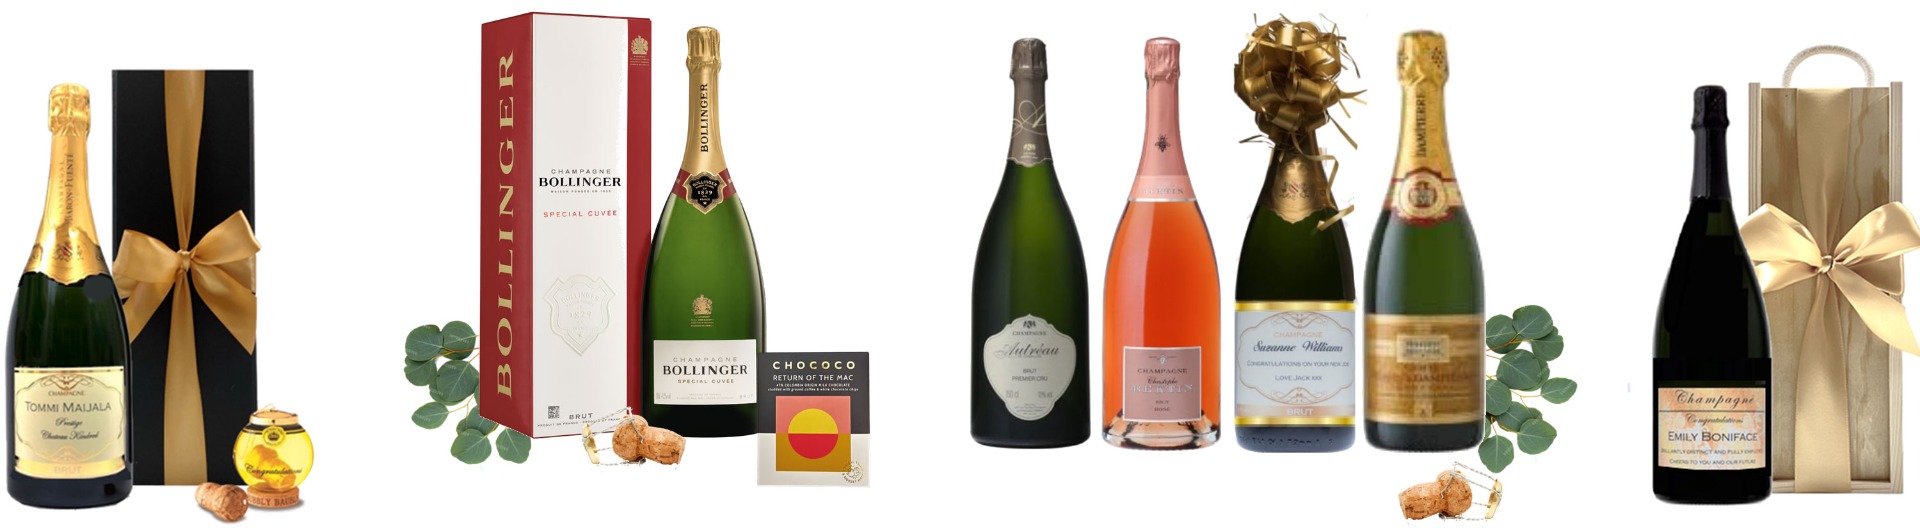 Champagne-Magnums-banner